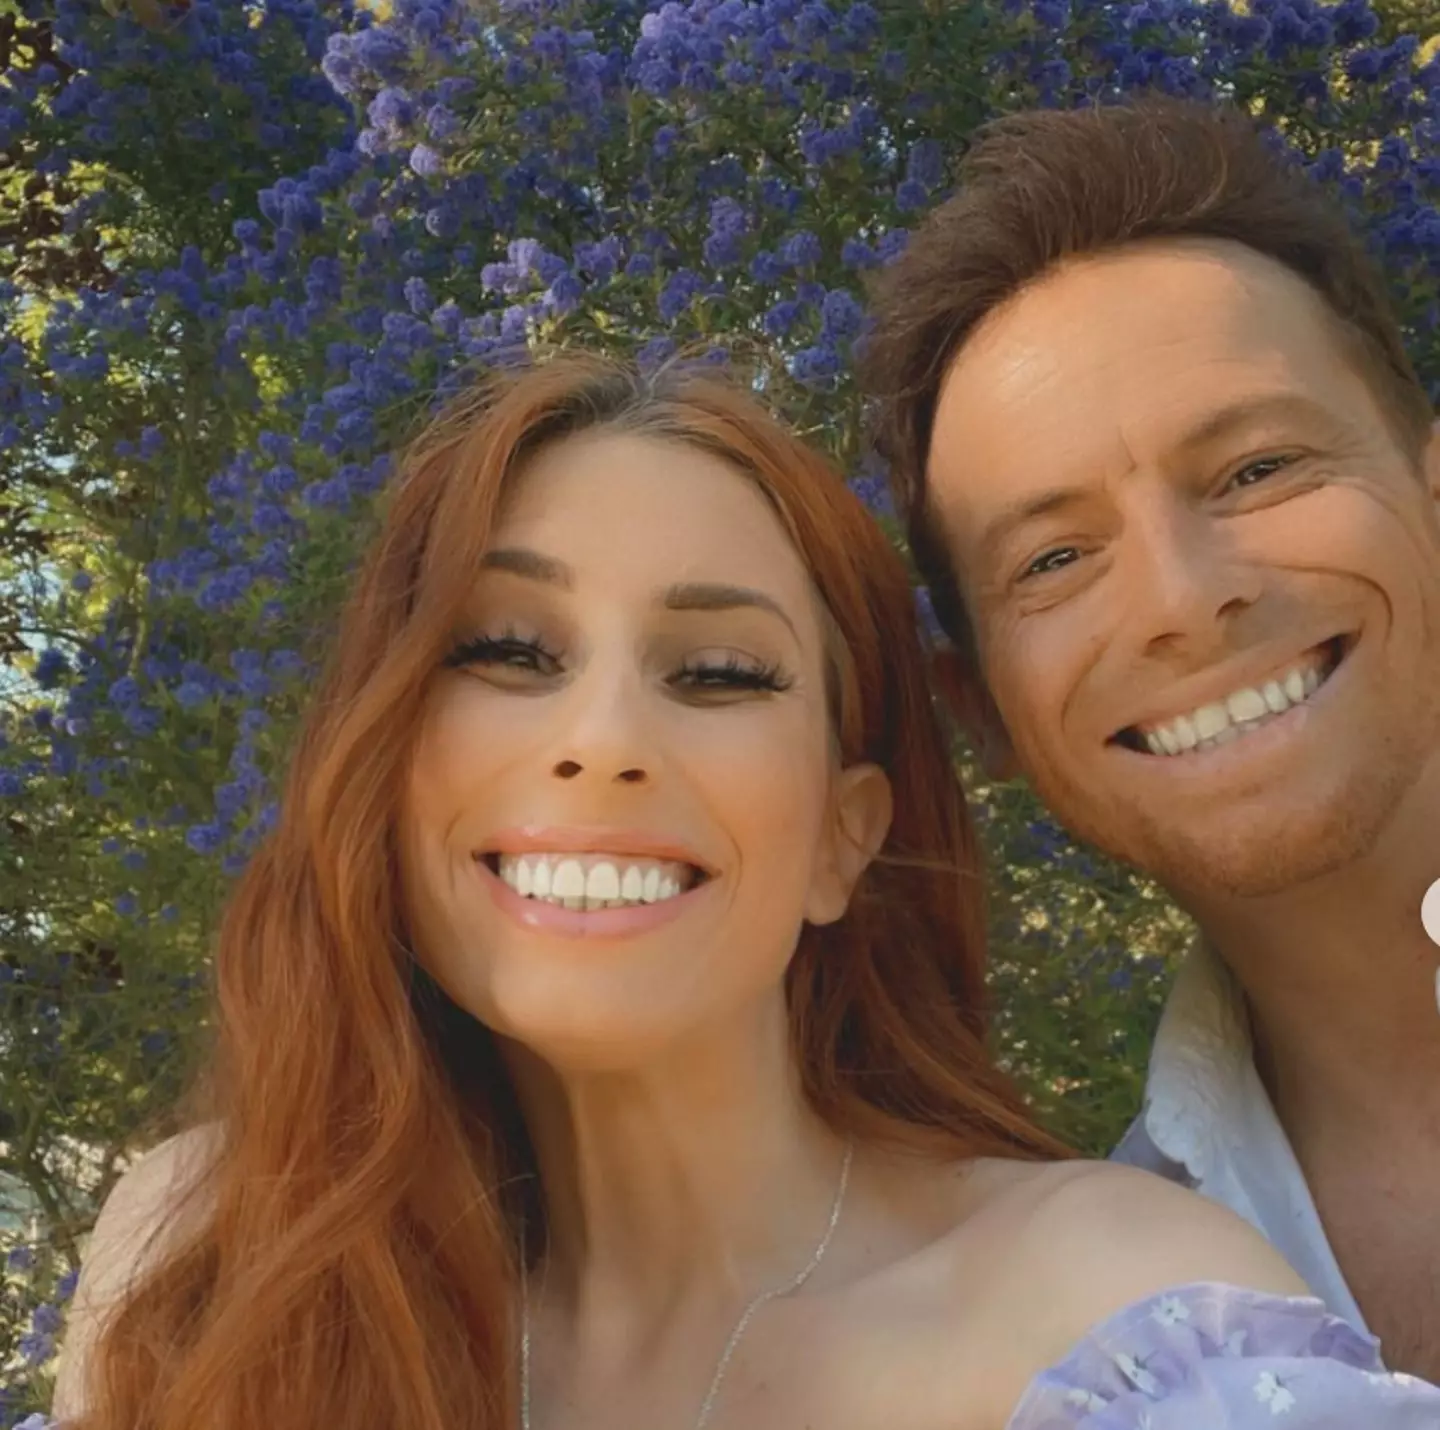 Joe Swash and Stacey Solomon married in 2022.